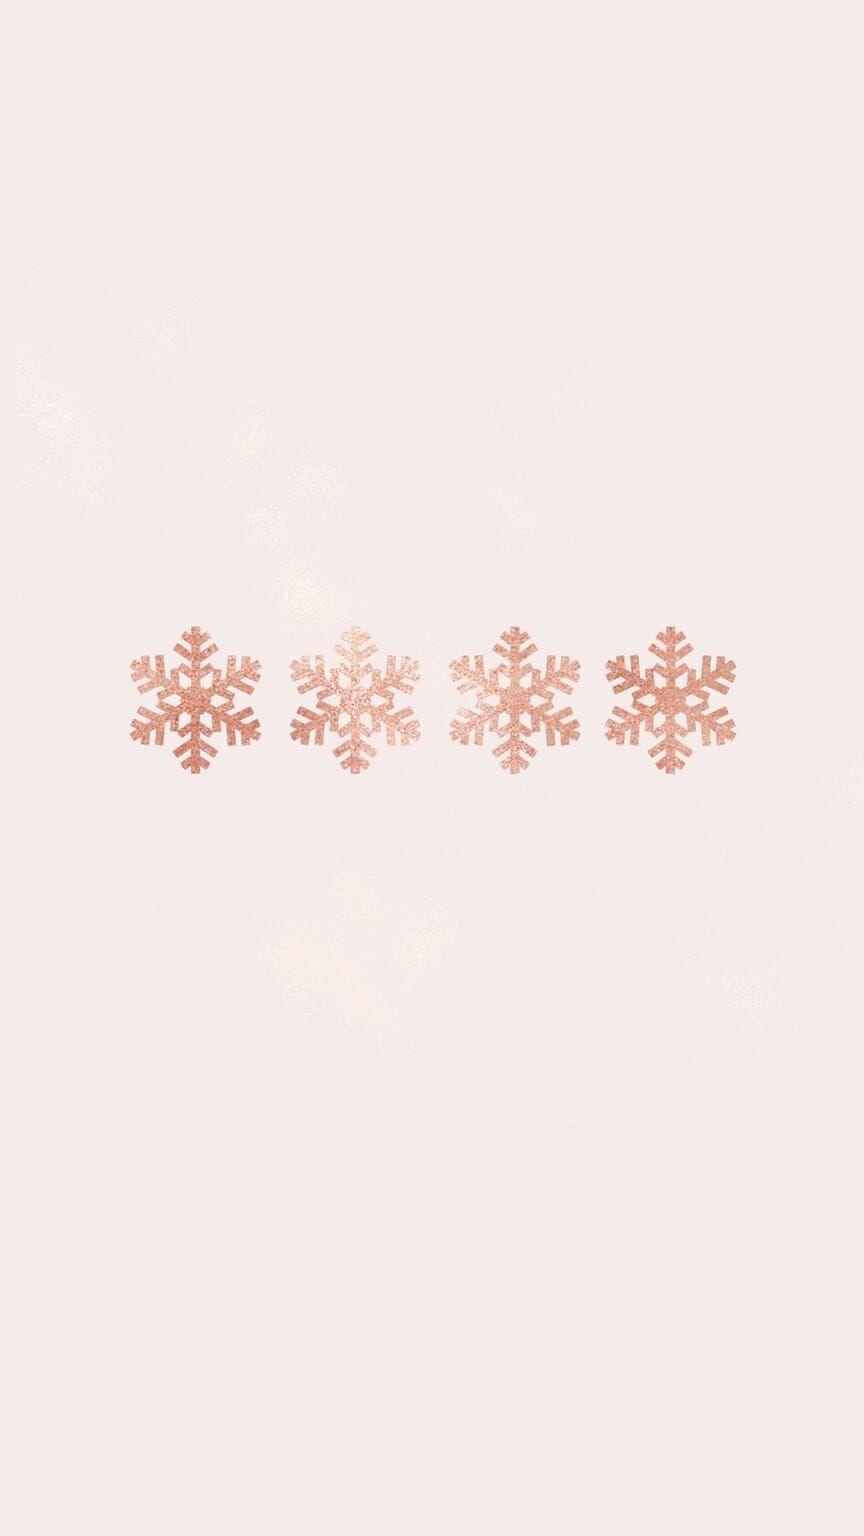 Rose gold snowflakes on a light pink background - Christmas, cute Christmas, Christmas iPhone